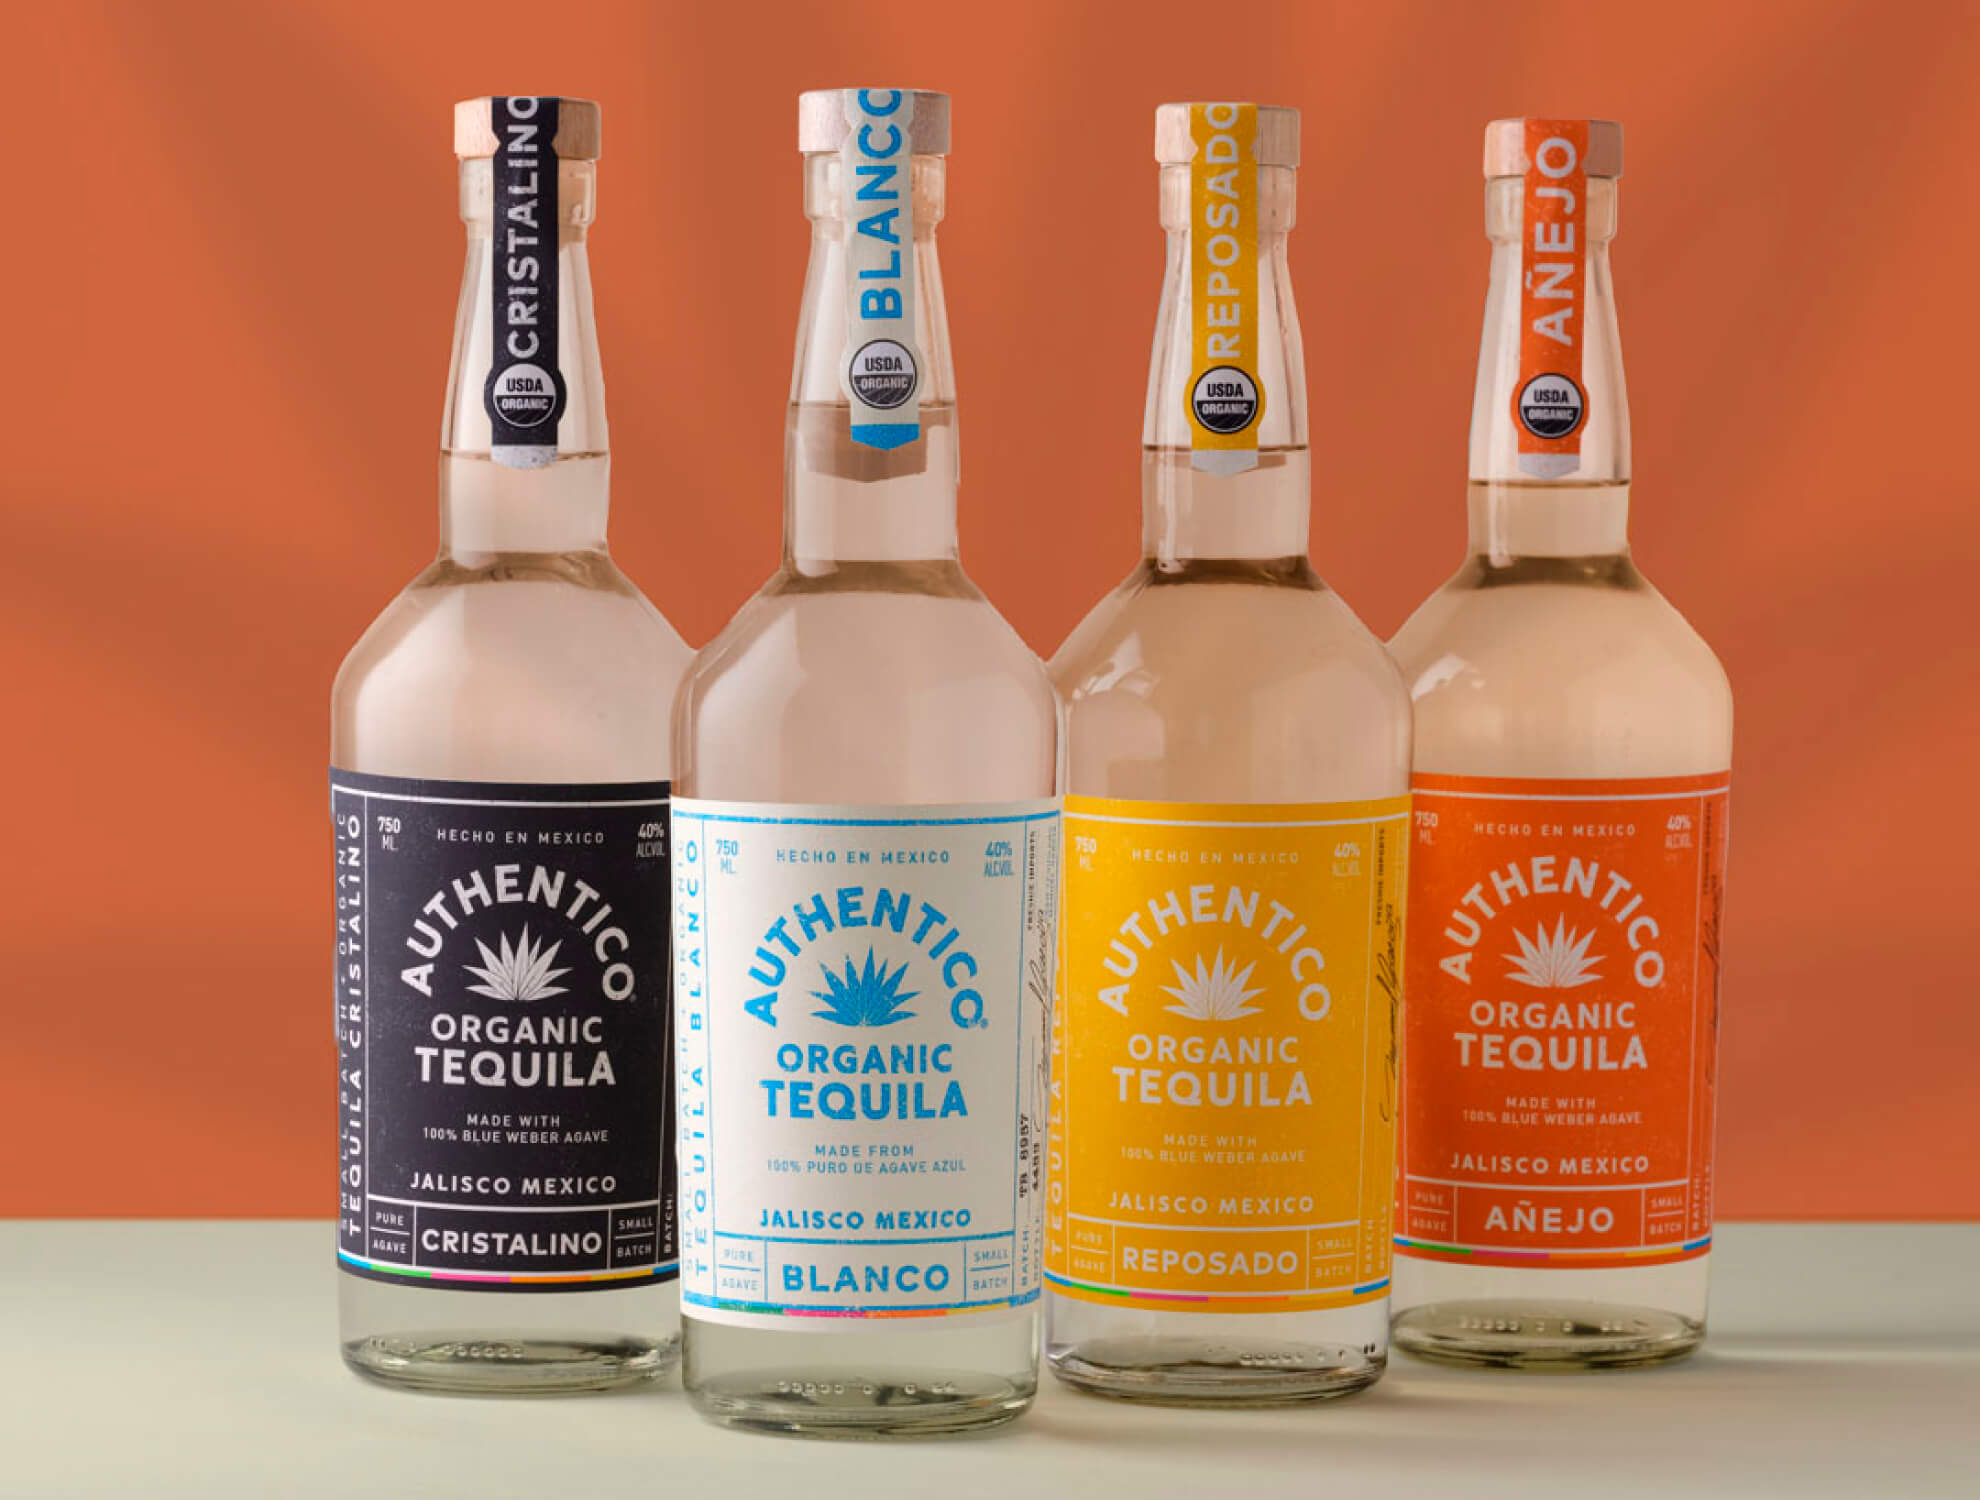 AUTHENTICO ORGANIC TEQUILA LINE UP